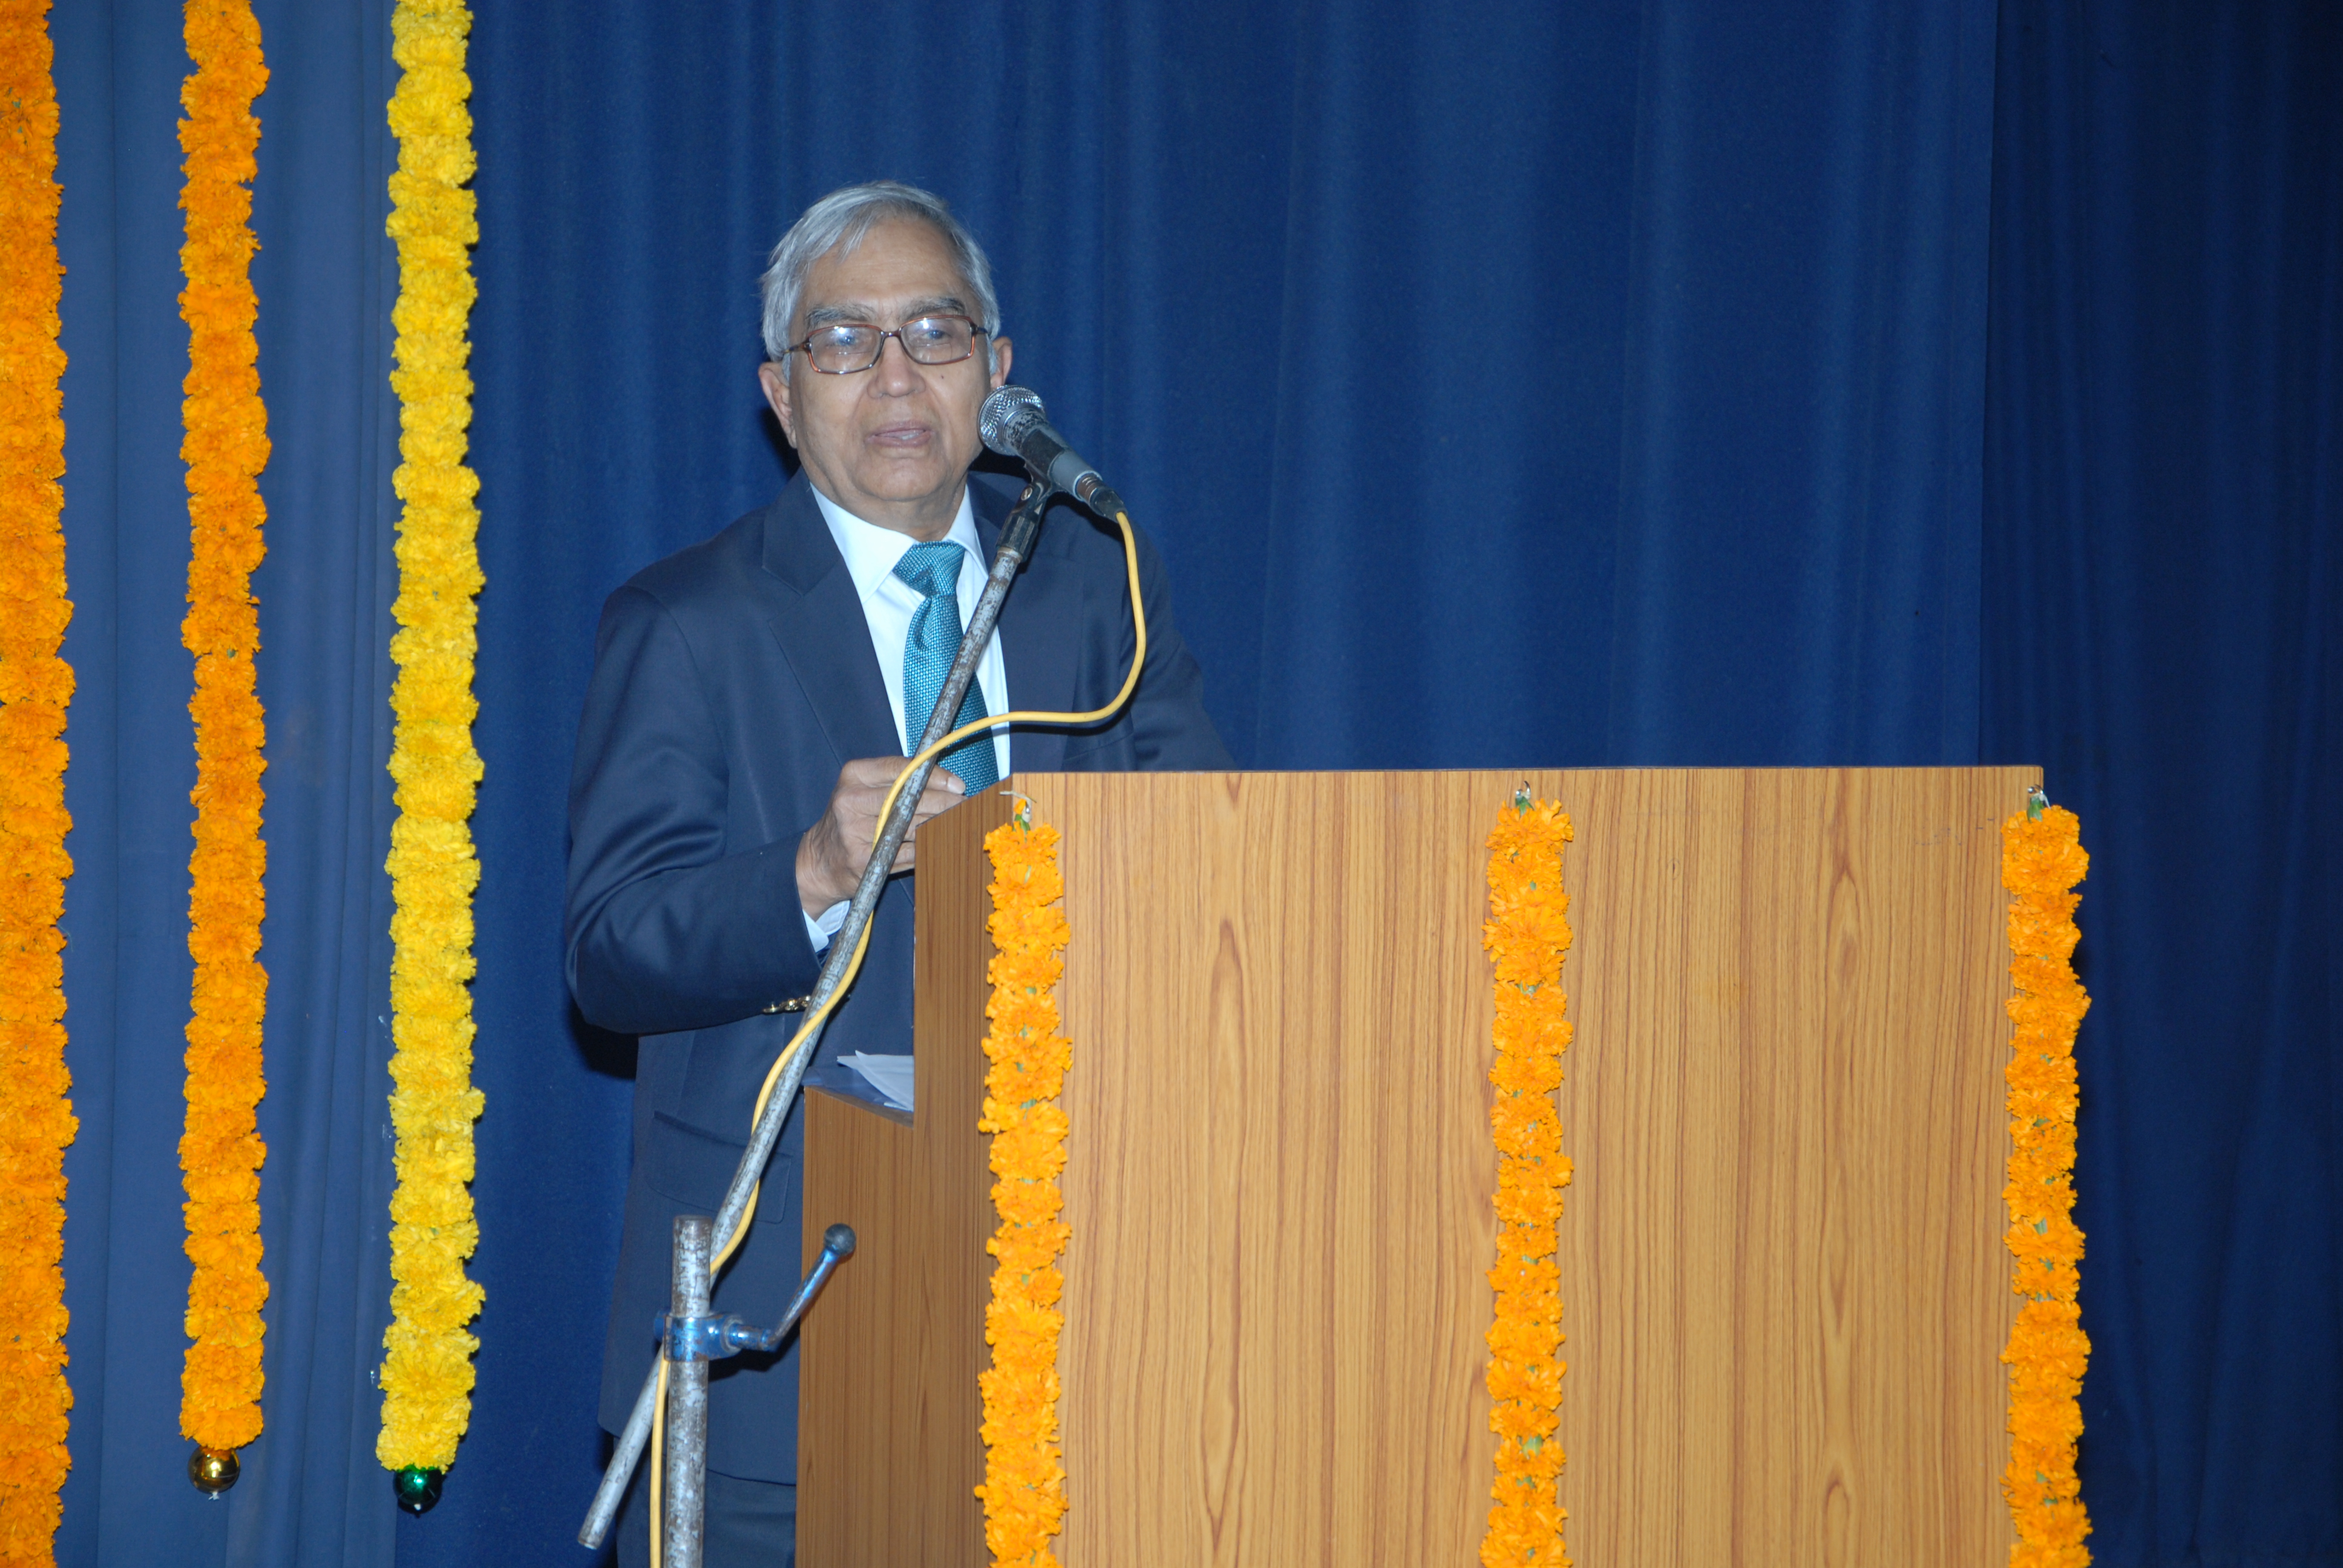 Dr. Singhal addresses the audience